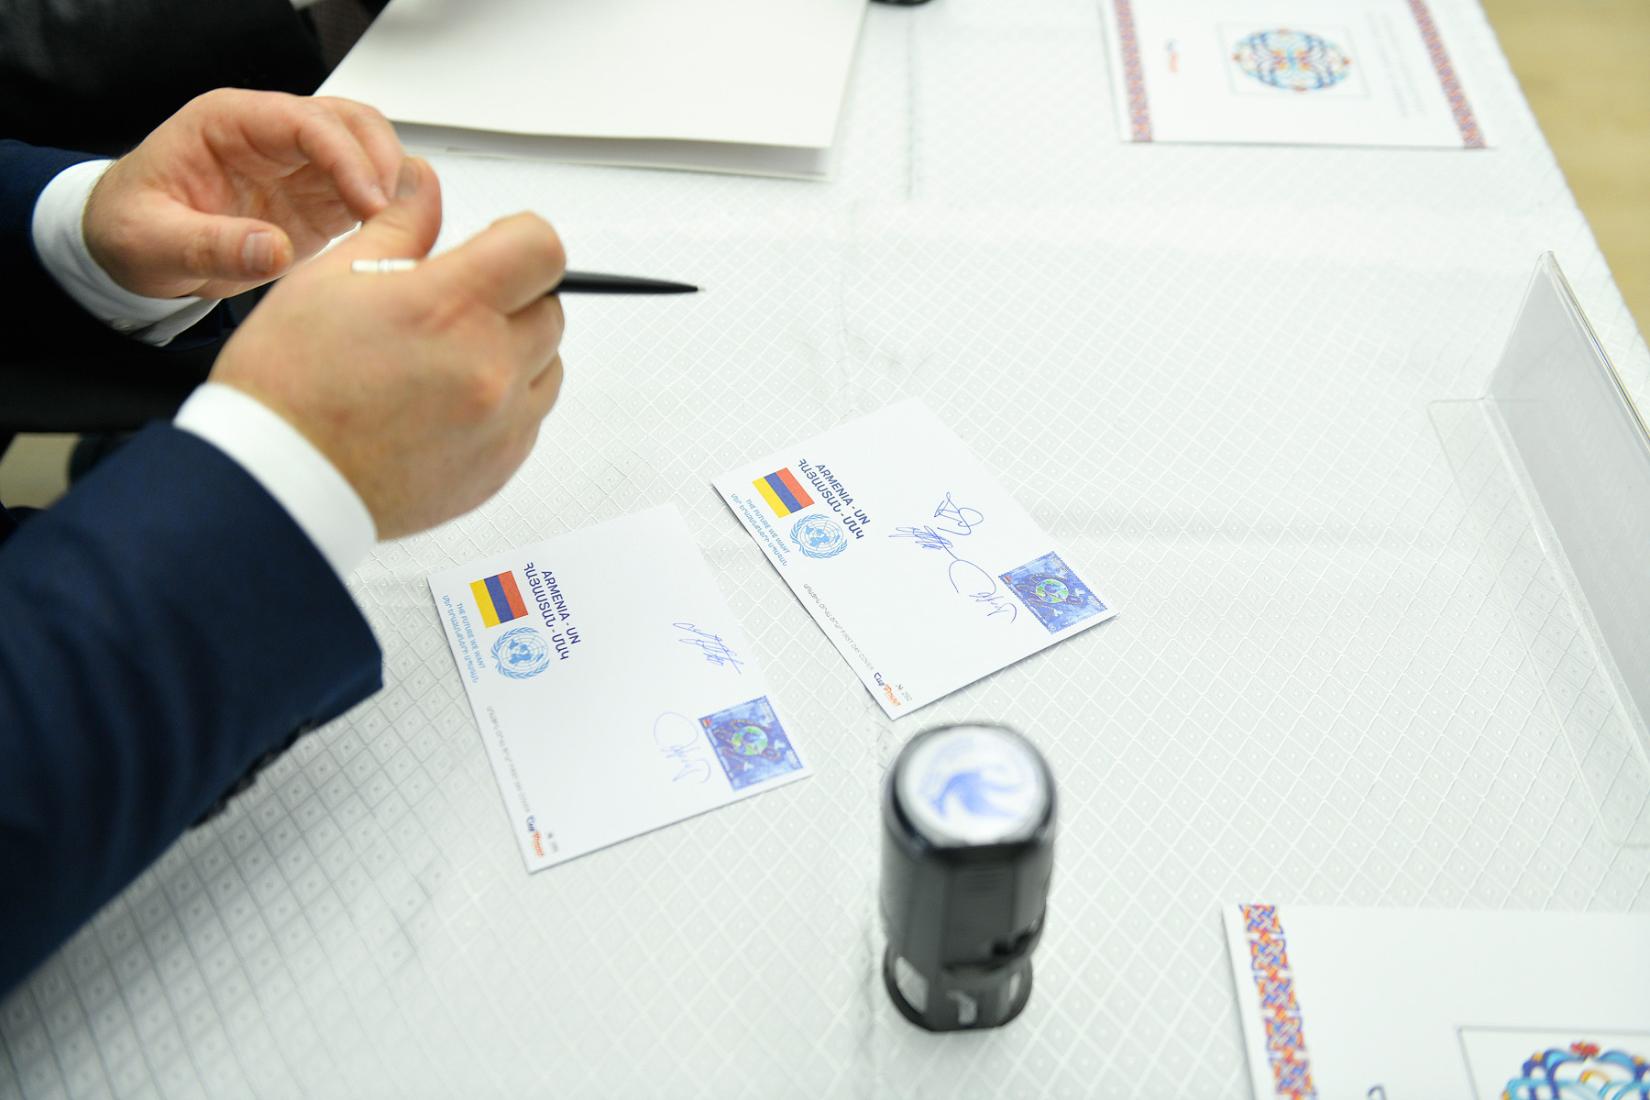 One postage stamp dedicated to the theme “UN in Armenia. “The future we want”” has been put into circulation.